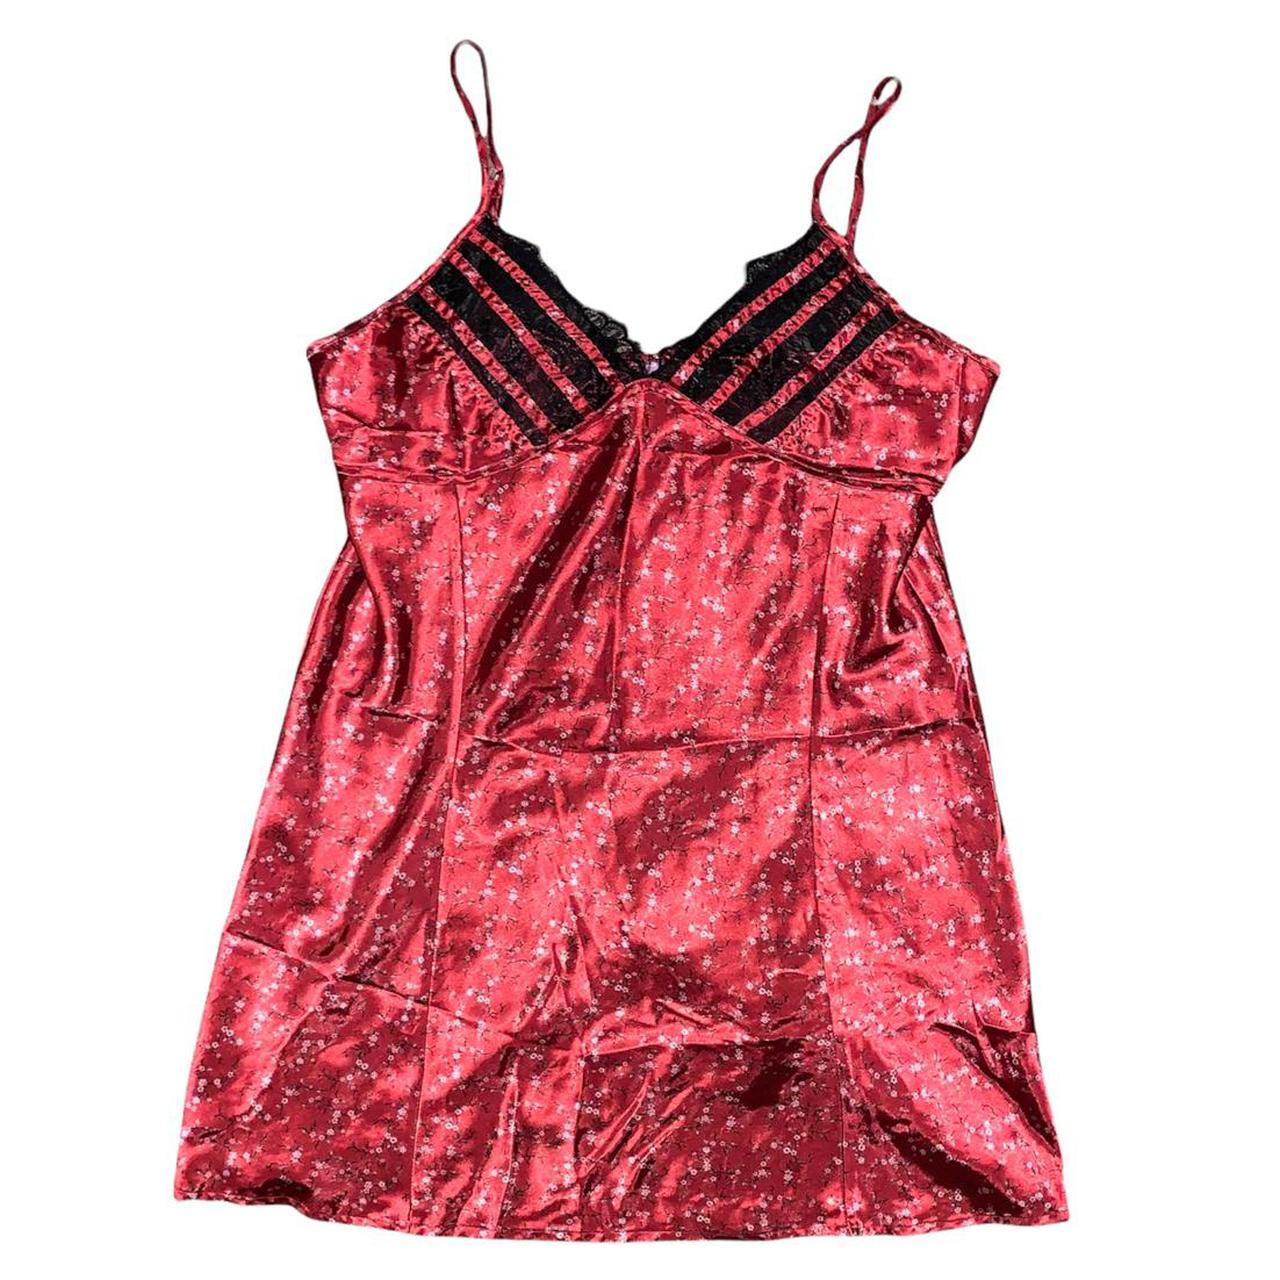 Product Image 2 - Intimate Secrets Red Lace Floral